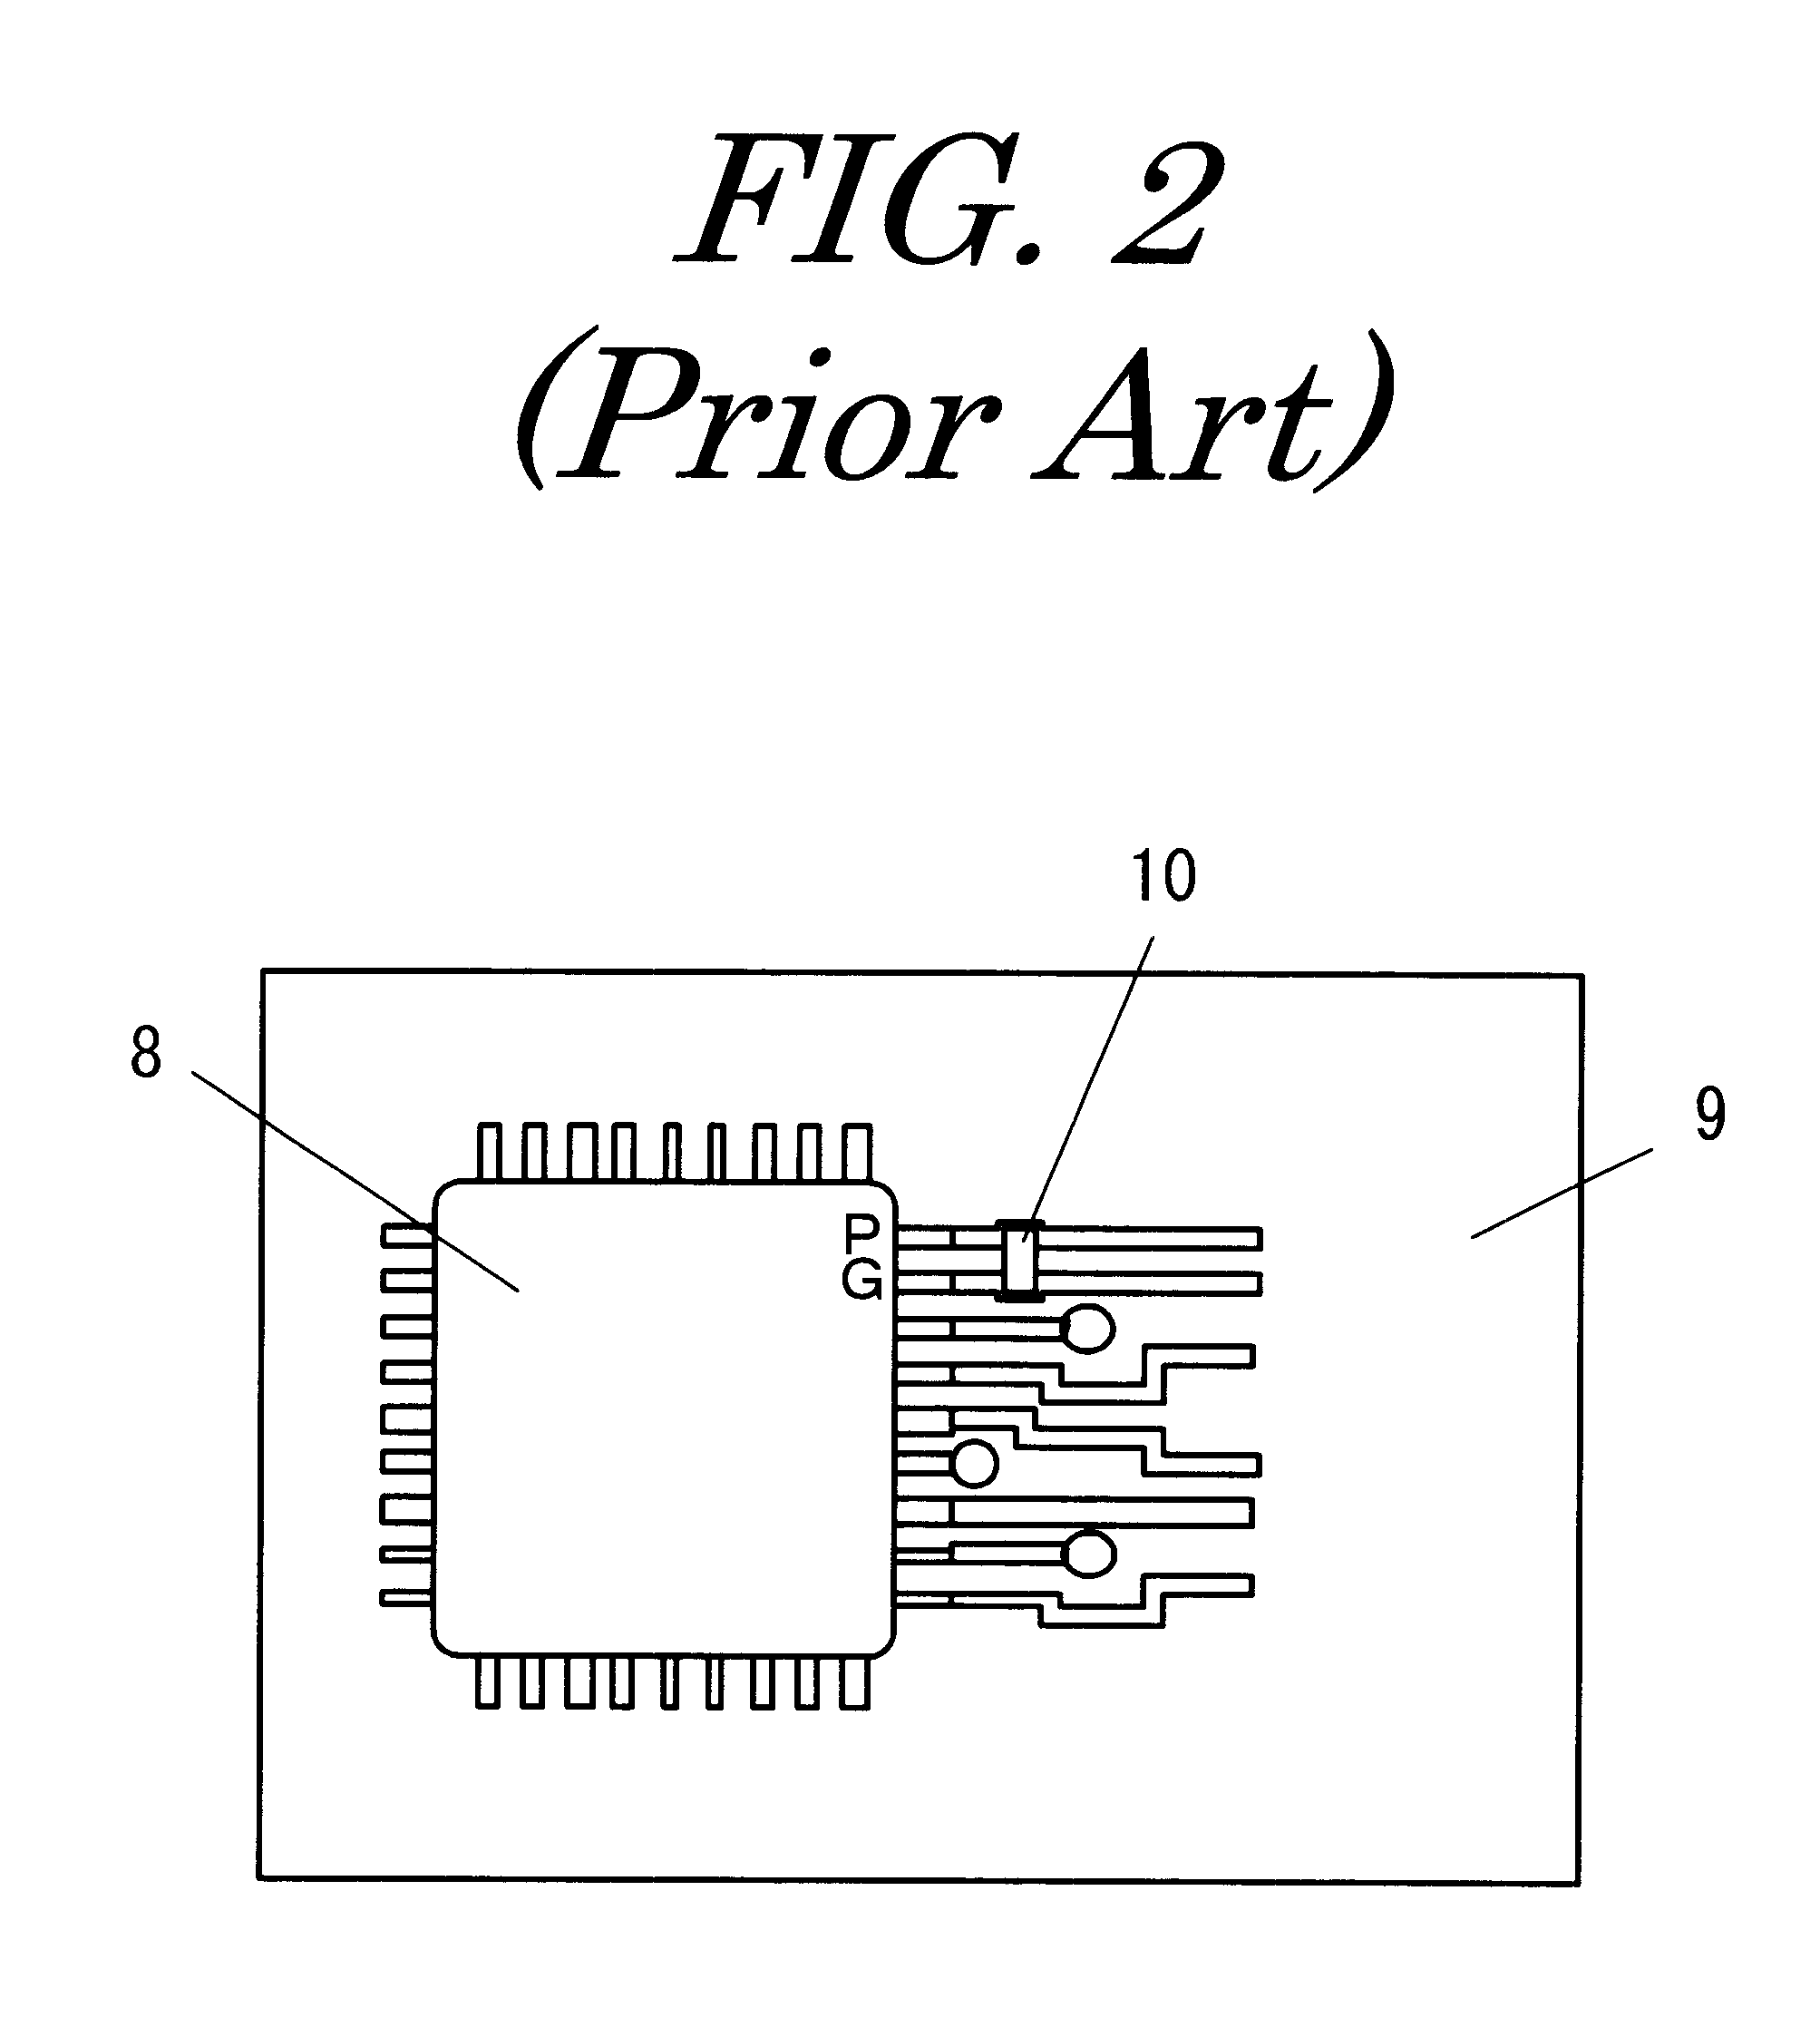 Semiconductor apparatus with decoupling capacitor